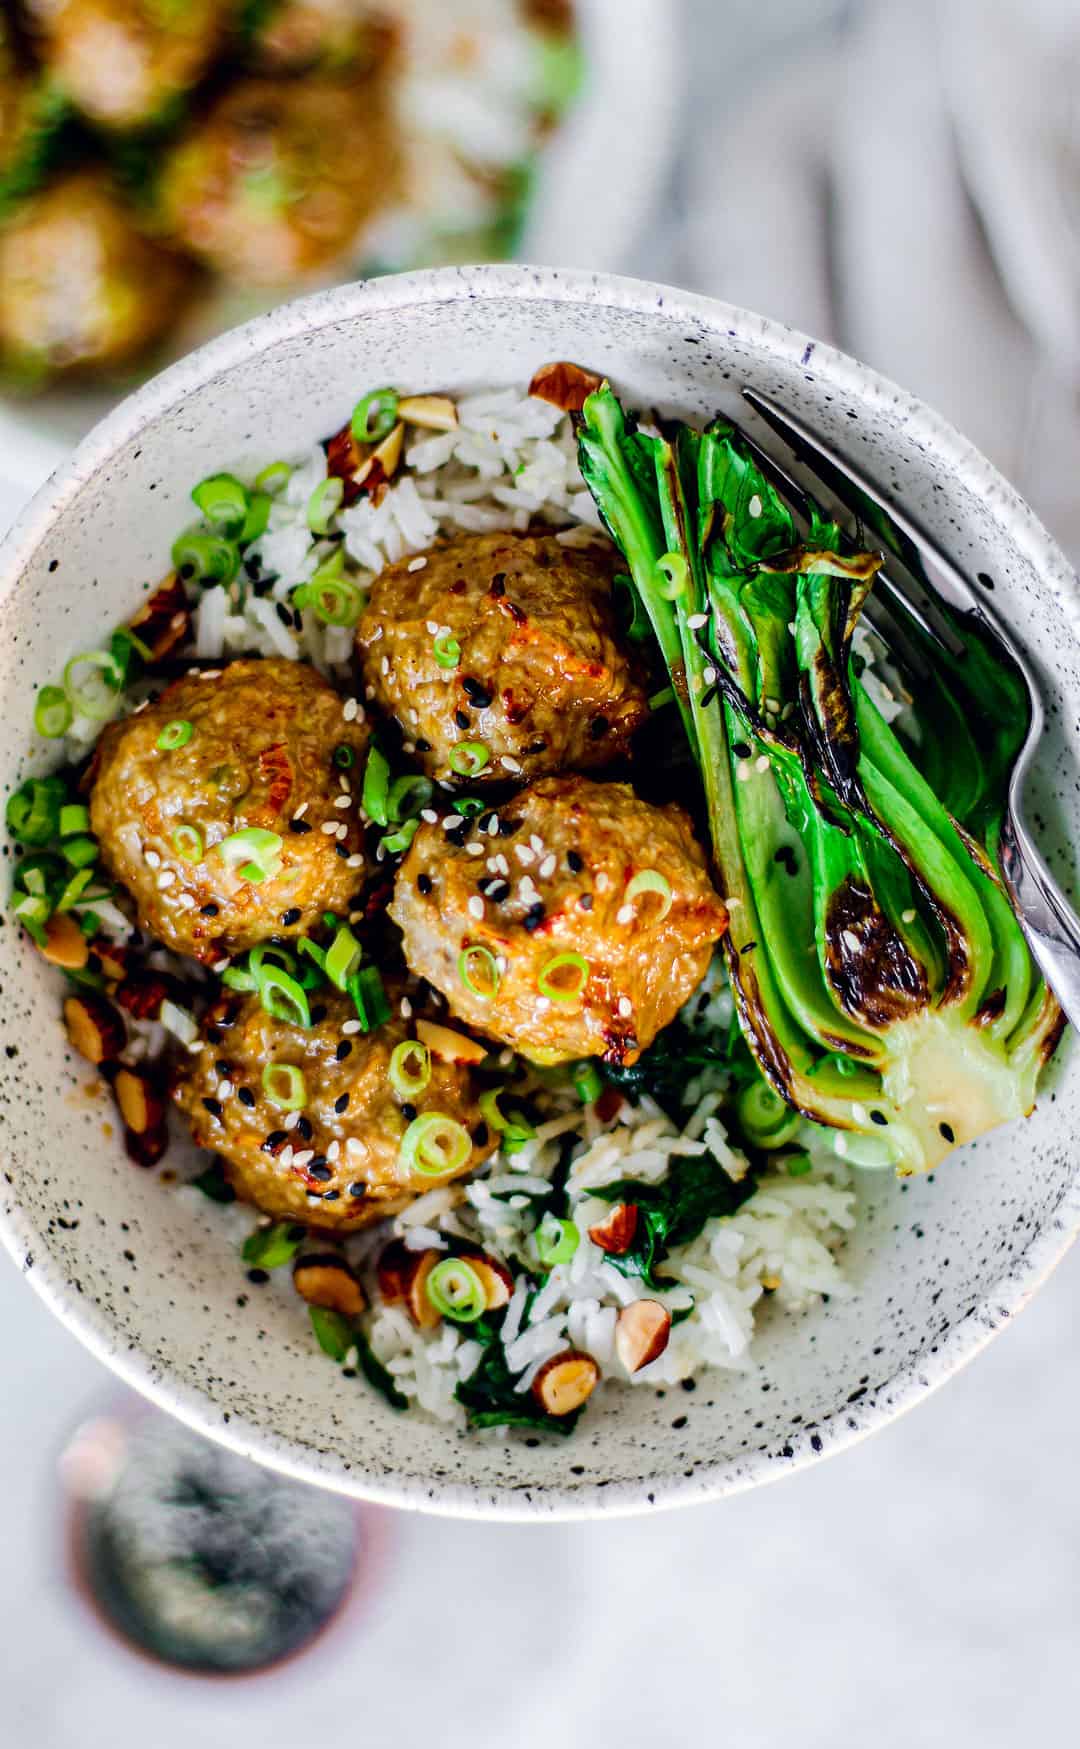 Garlic and ginger meatballs served over rice with a side of green veggies. 